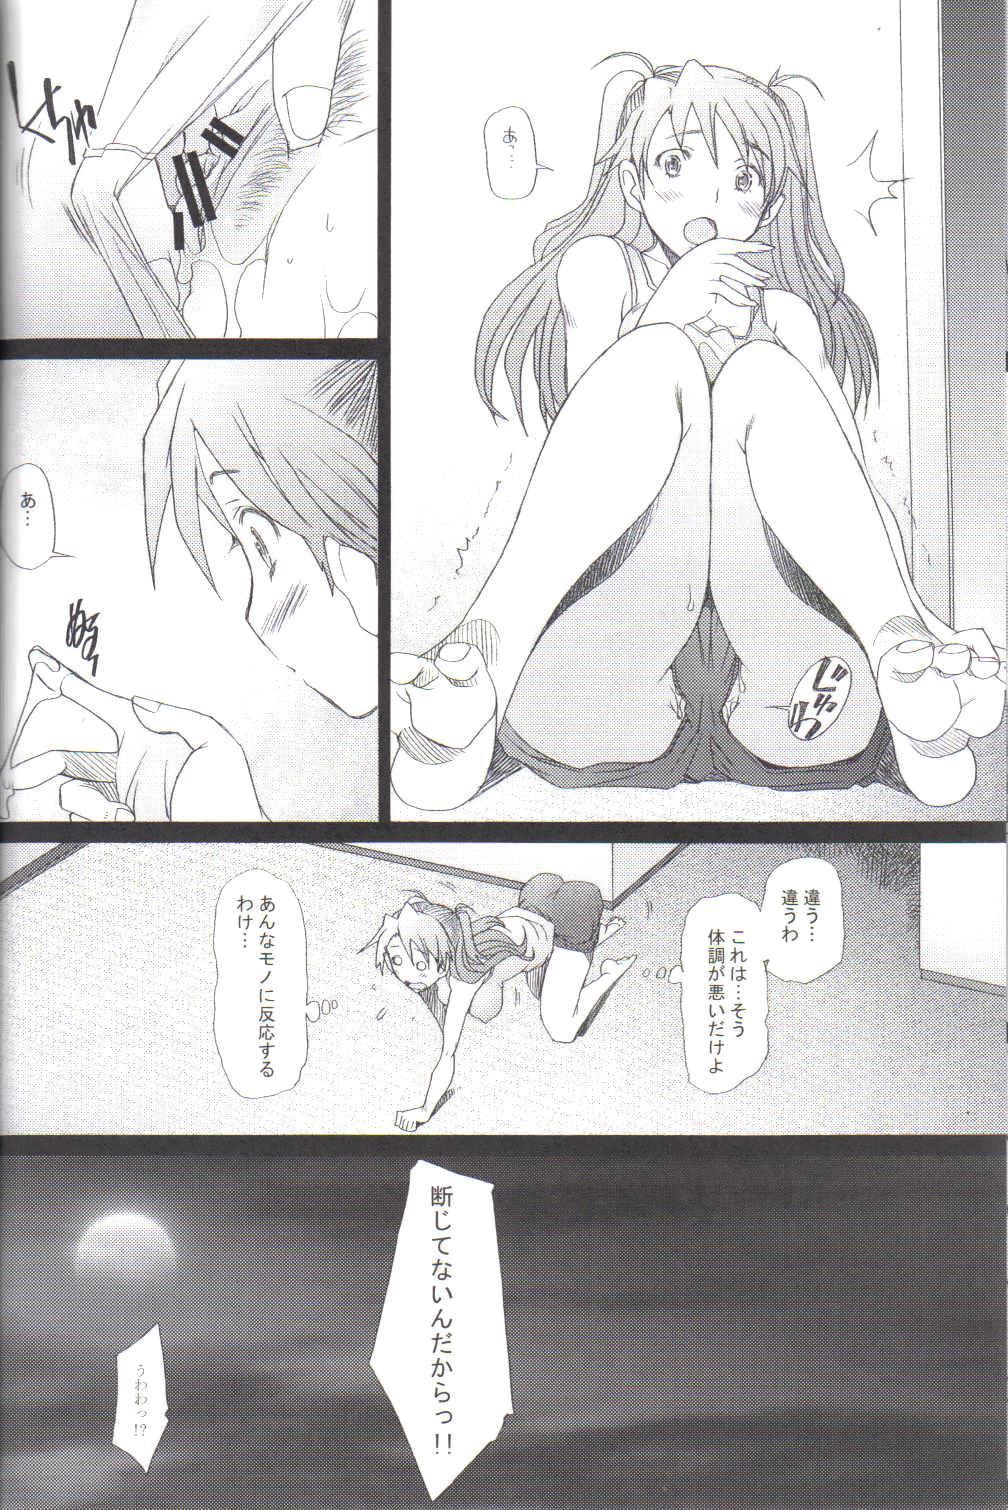 Gay Ass Fucking Confusion LEVEL A - Neon genesis evangelion Fun - Page 6